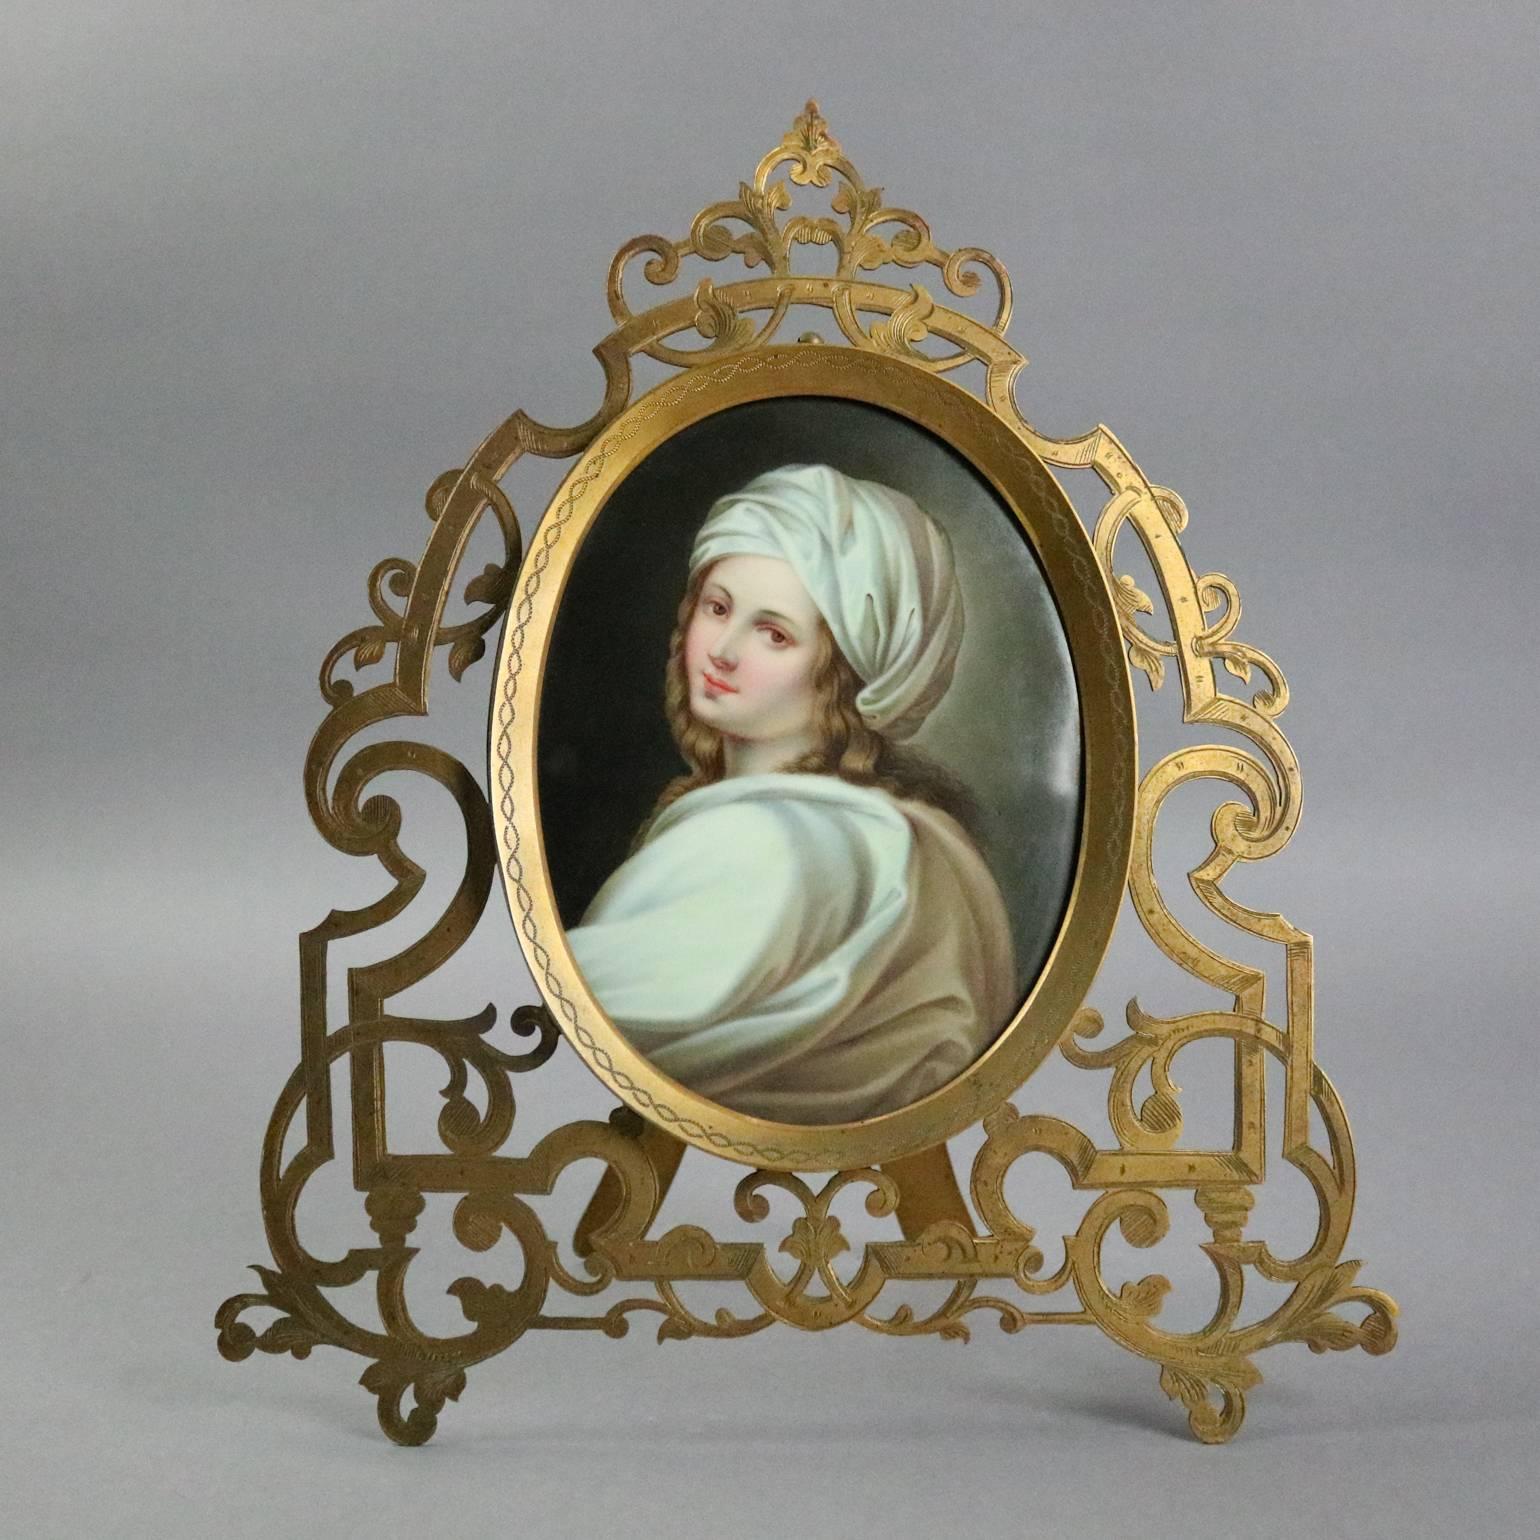 Antique KPM style porcelain portrait plaque depicting Beatrice Cenci (Italian, 1577-1599), a portrait variously attributed to Reni or Sirani, housed in pierced bronze scroll and foliate decorated frame, circa 1890

Measures: 12" H x 10"